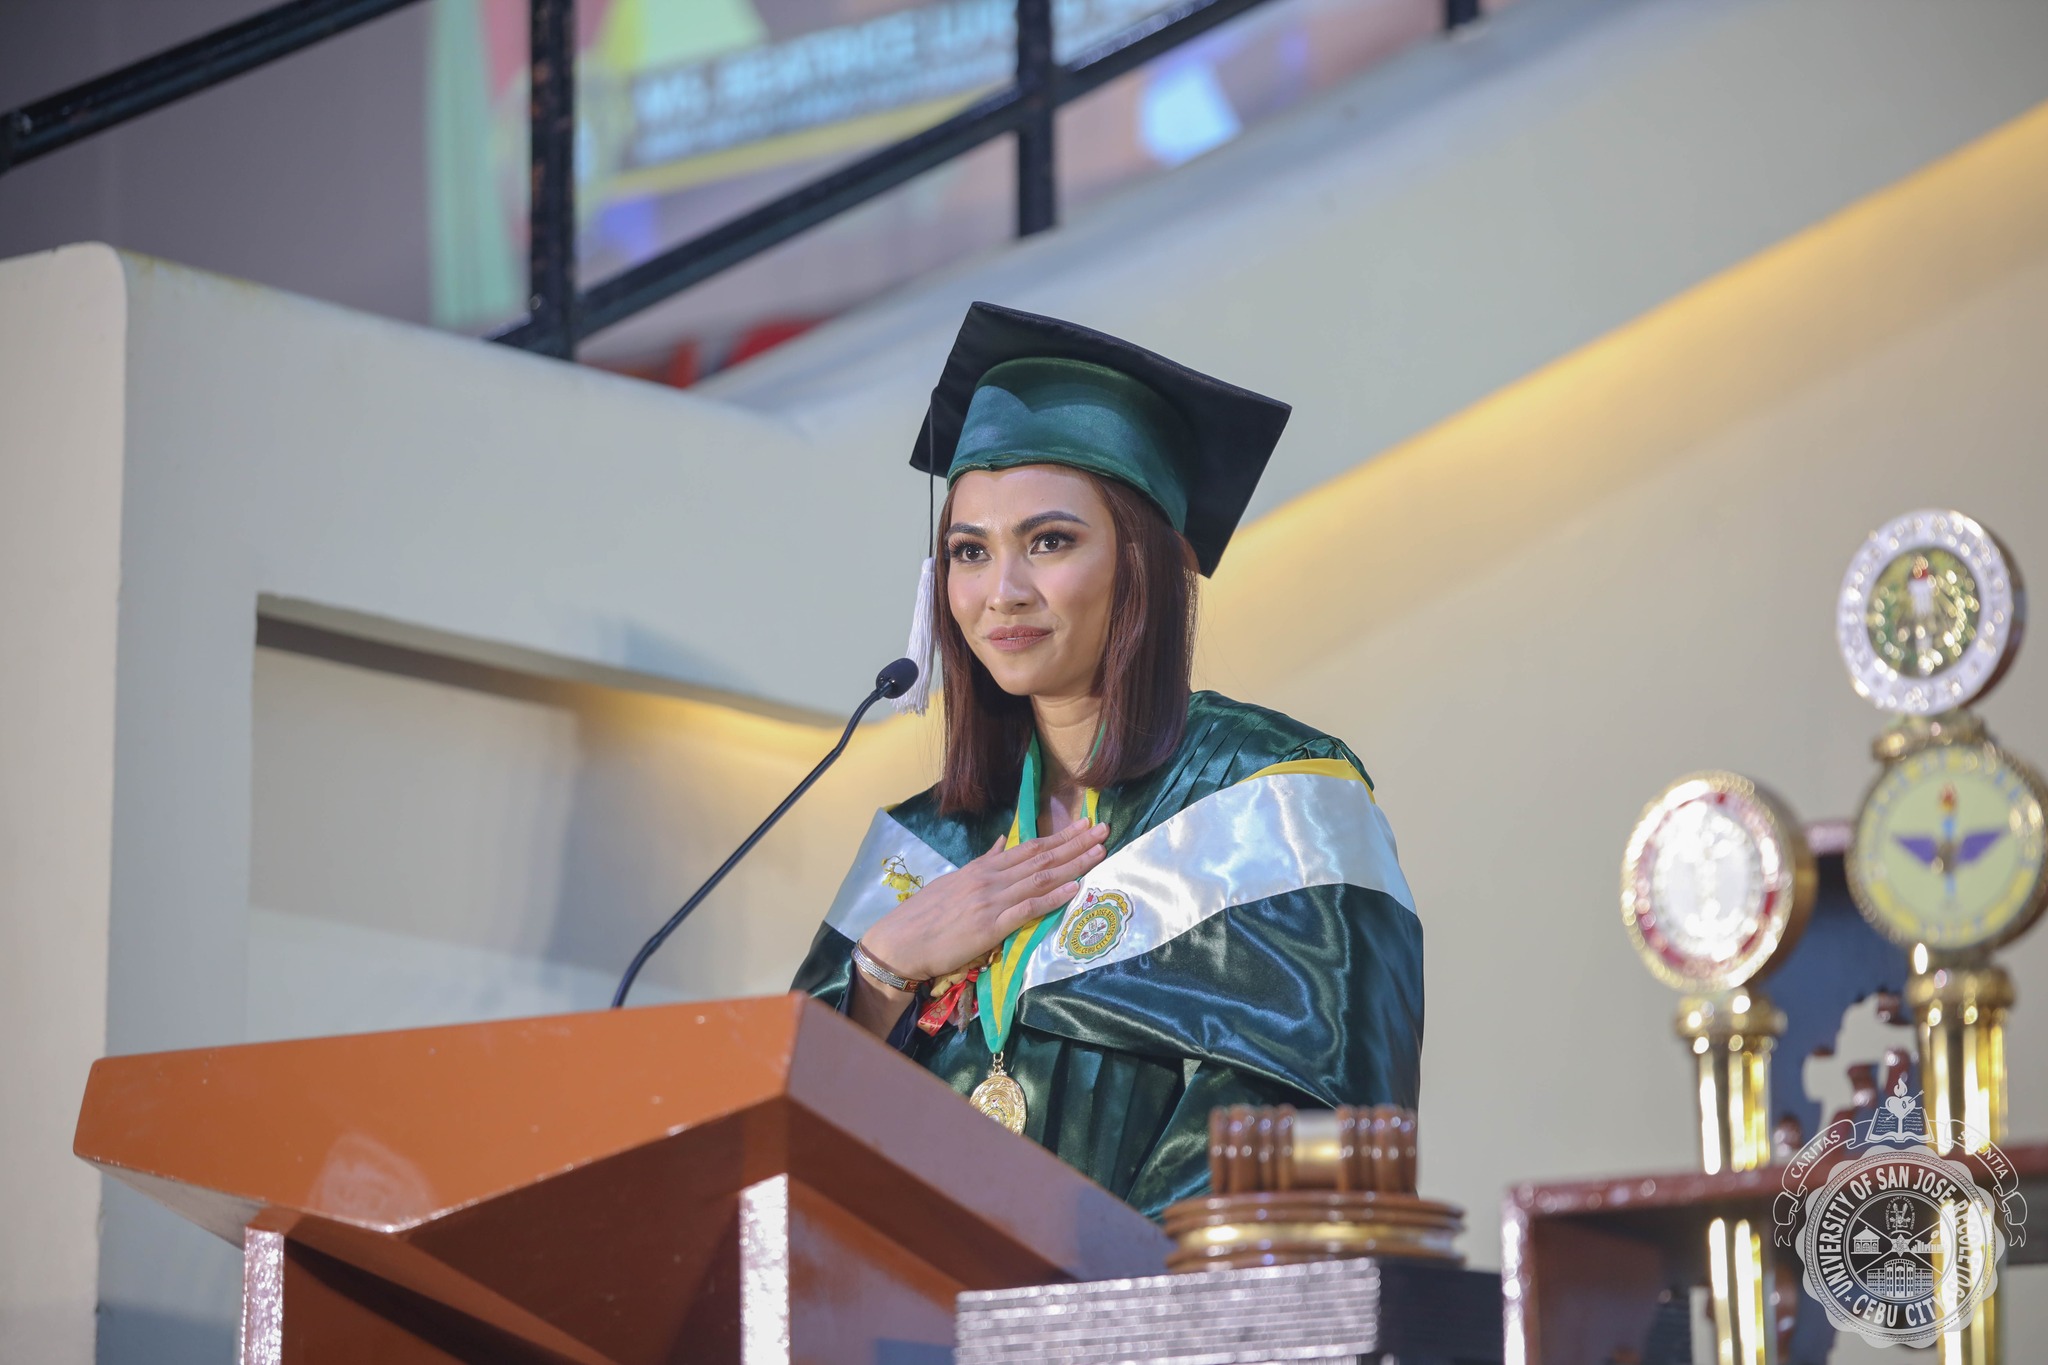 Bea Gomez graduates with a degree in Mass Communications from the University of San Jose-Recoletos